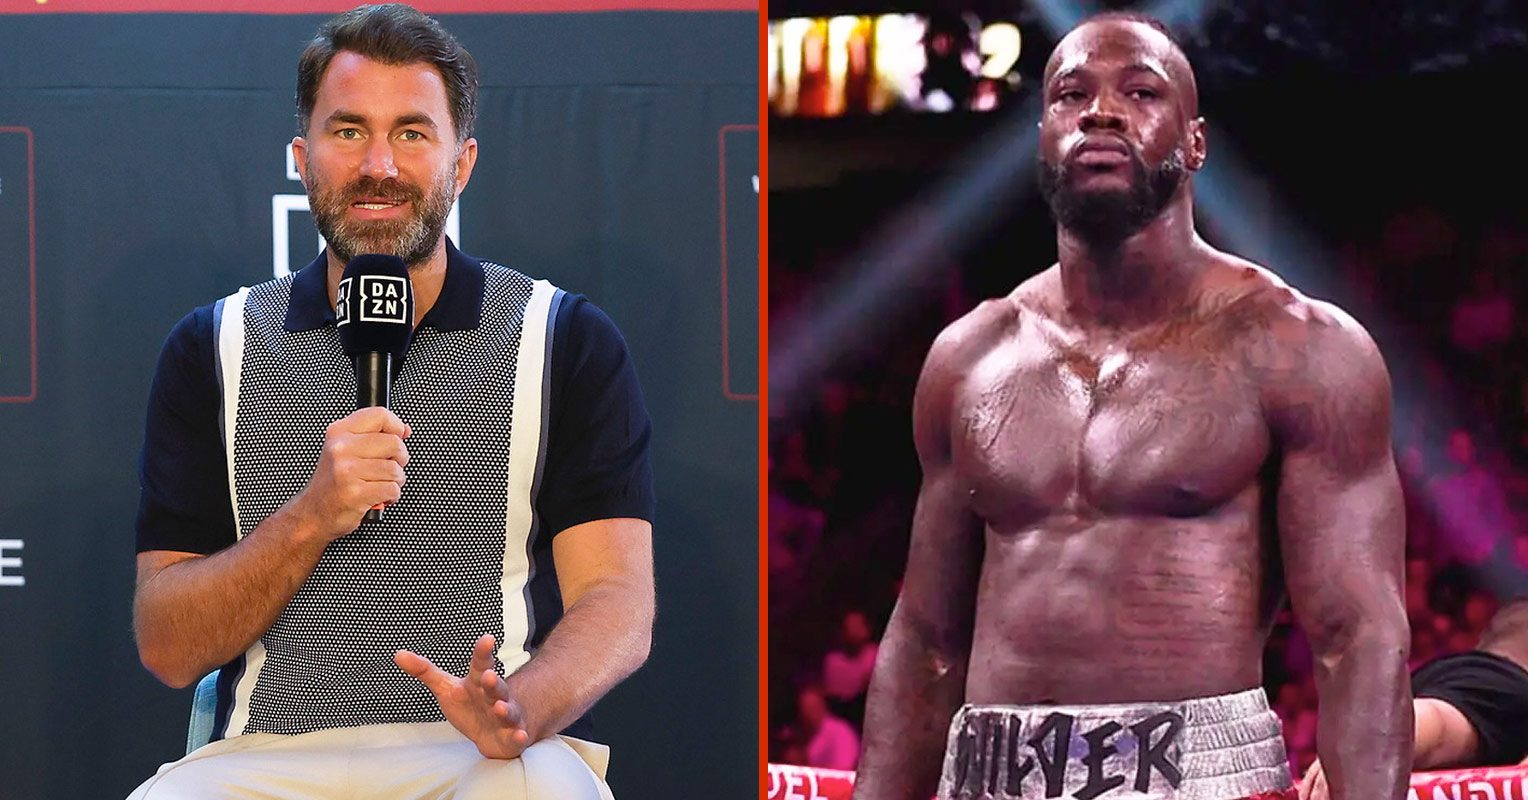 Eddie Hearn: I Don't Care About Deontay Wilder, He Doesn't Want To Fight